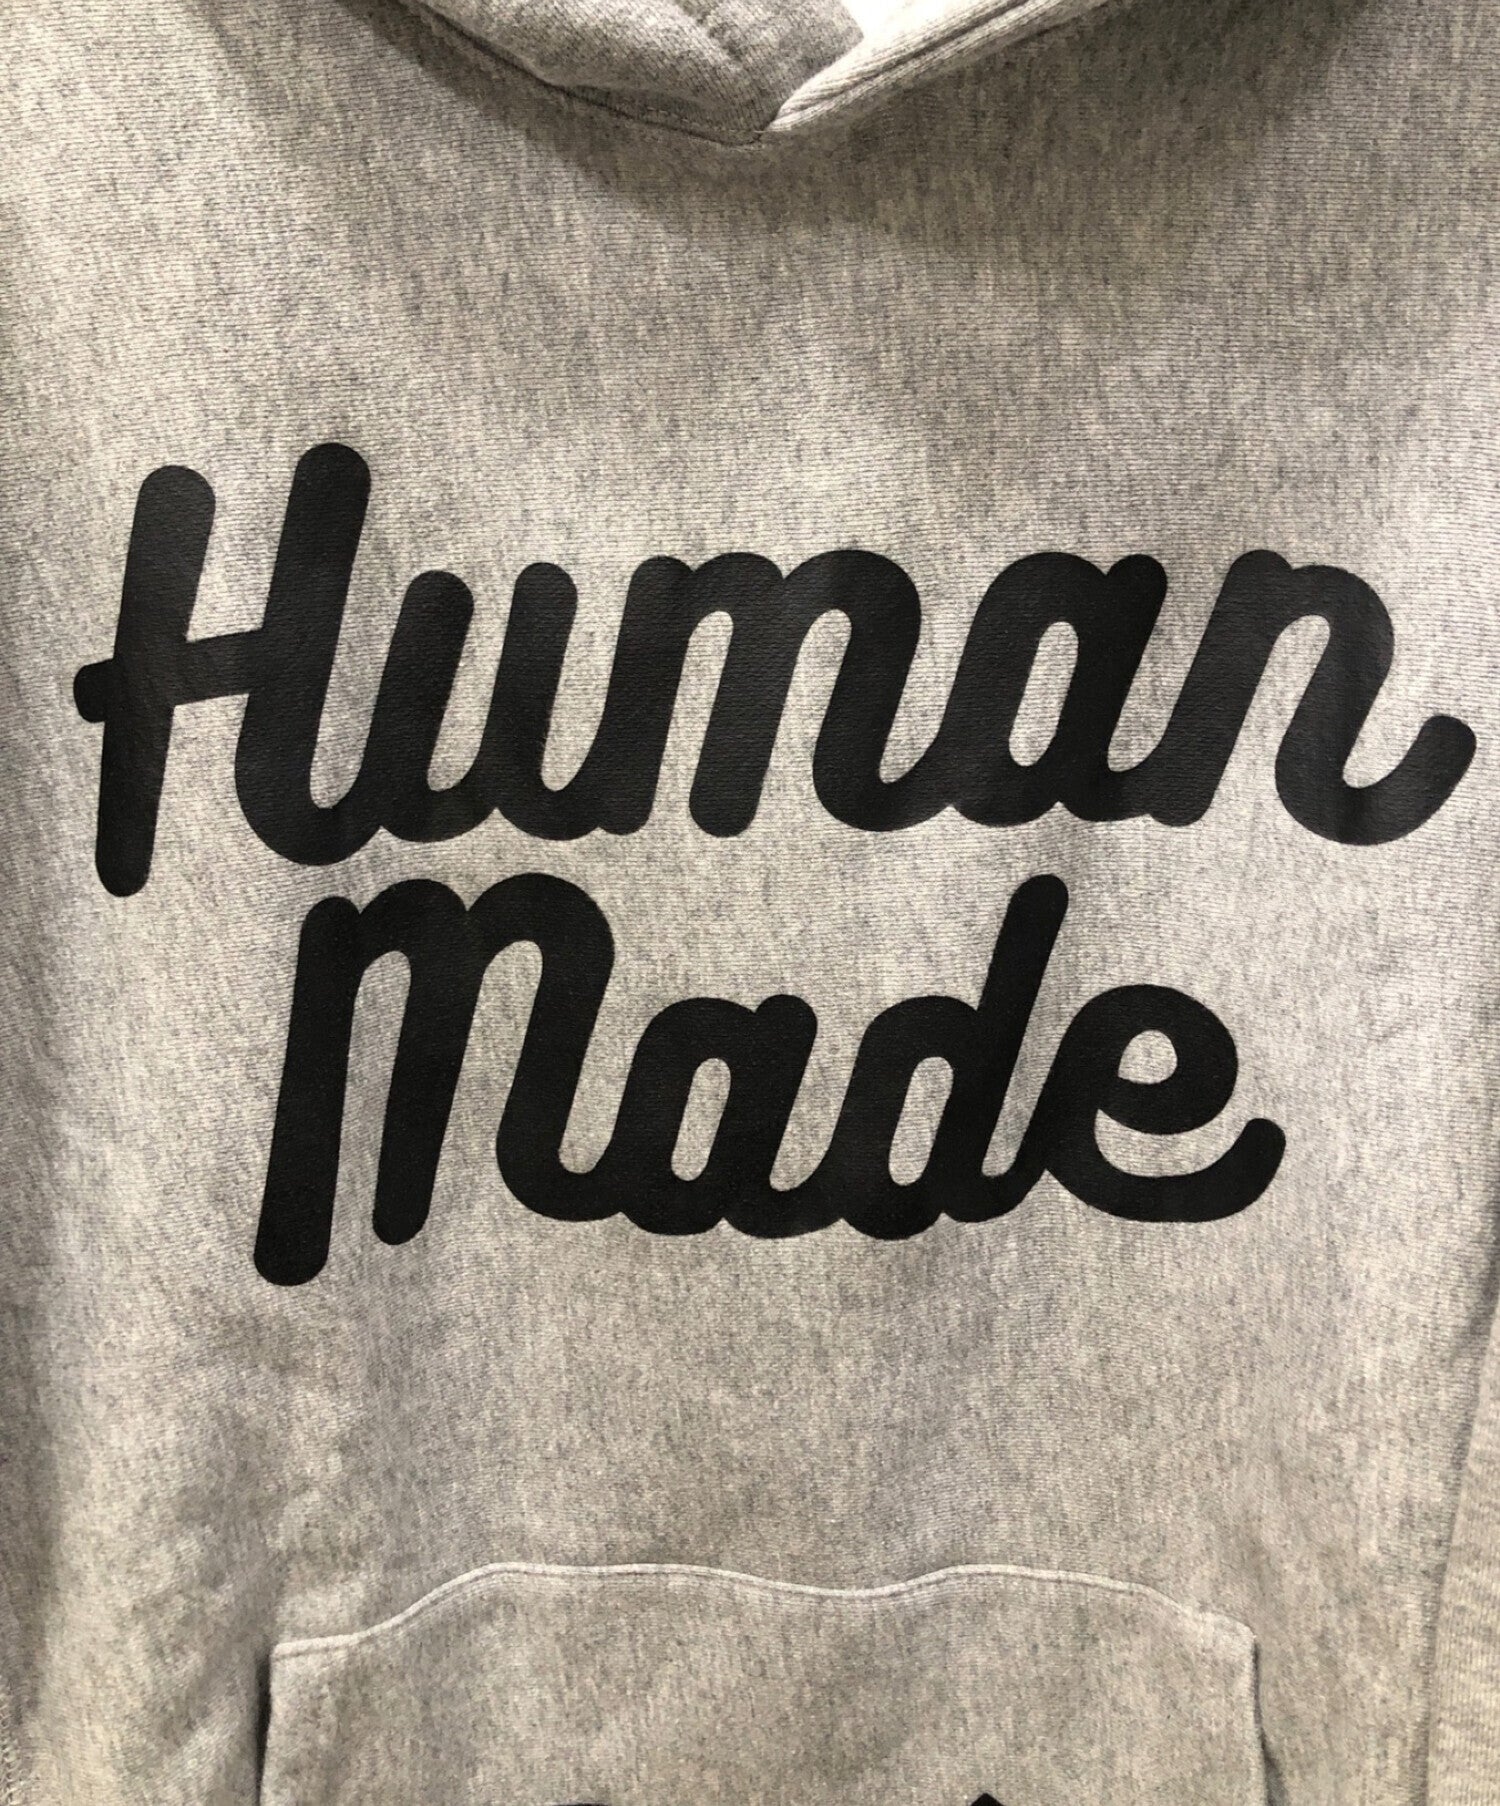 Shop HUMAN MADE at Archive Factory